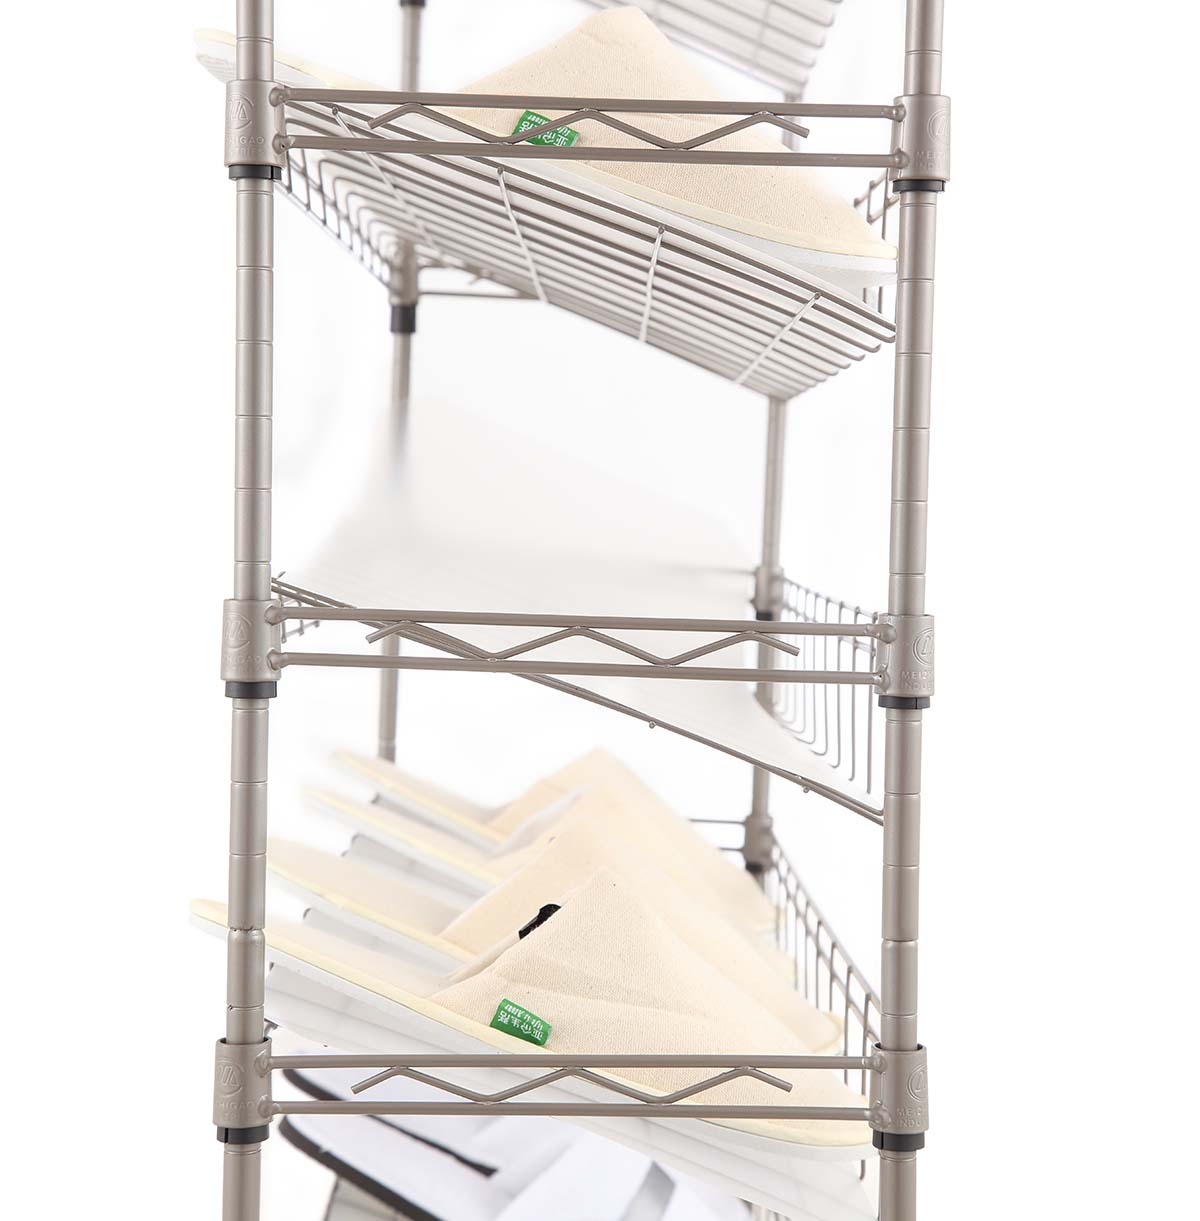 4-tier metal utility rolling cart manufacture